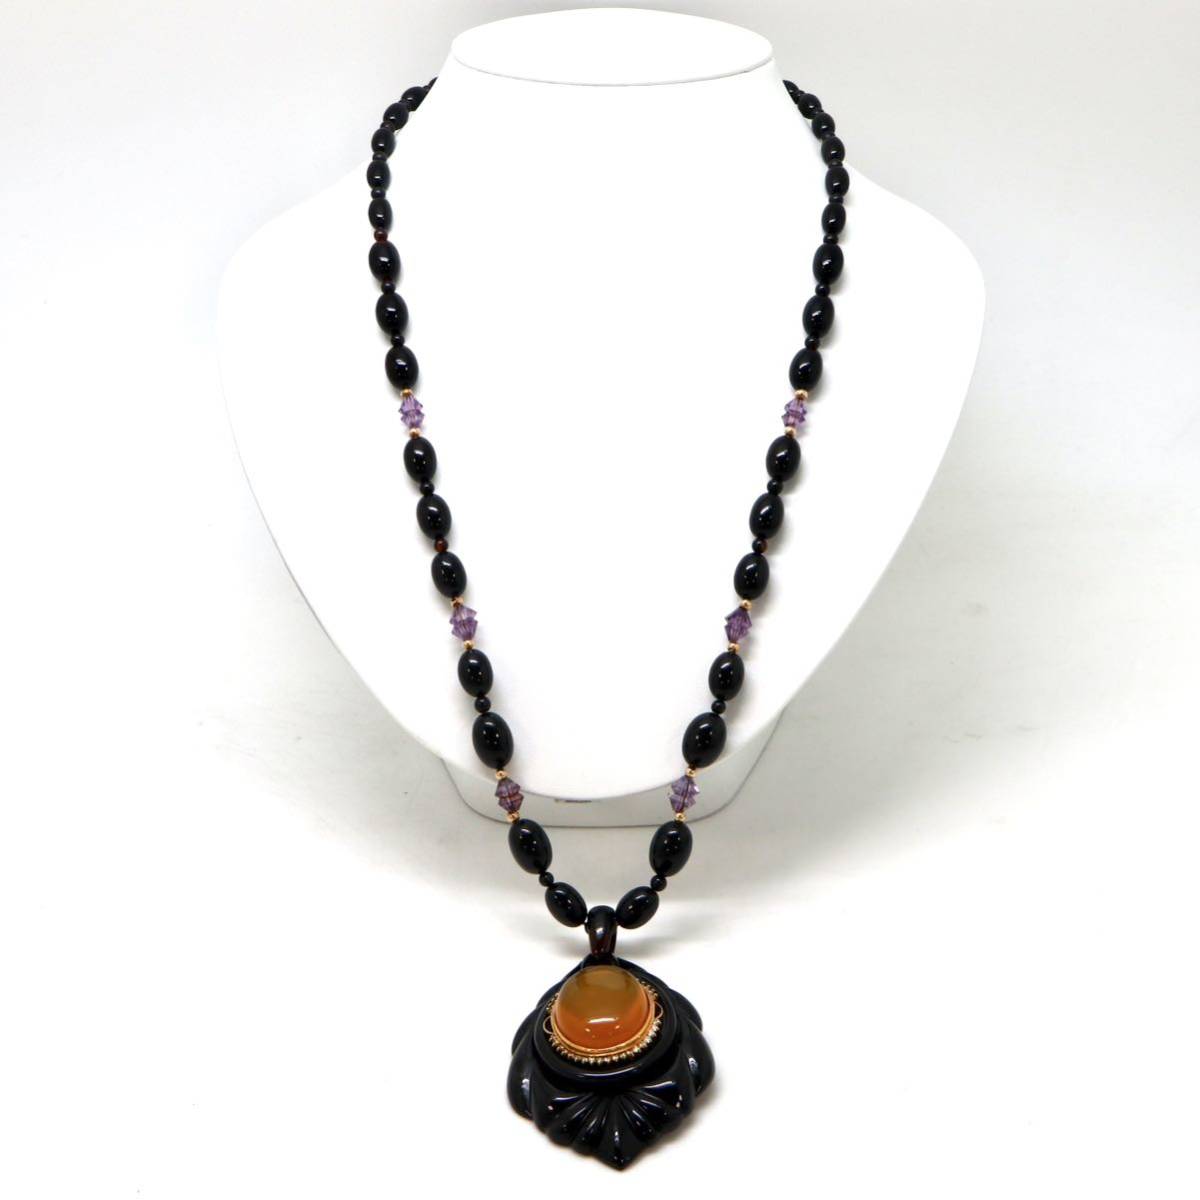 ◆K18 天然石/天然ダイヤモンドネックレス◆M 約41.1g 約65.0cm 琥珀 コハク アメジスト jewelry necklace ジュエリー EA7/EA7_画像2